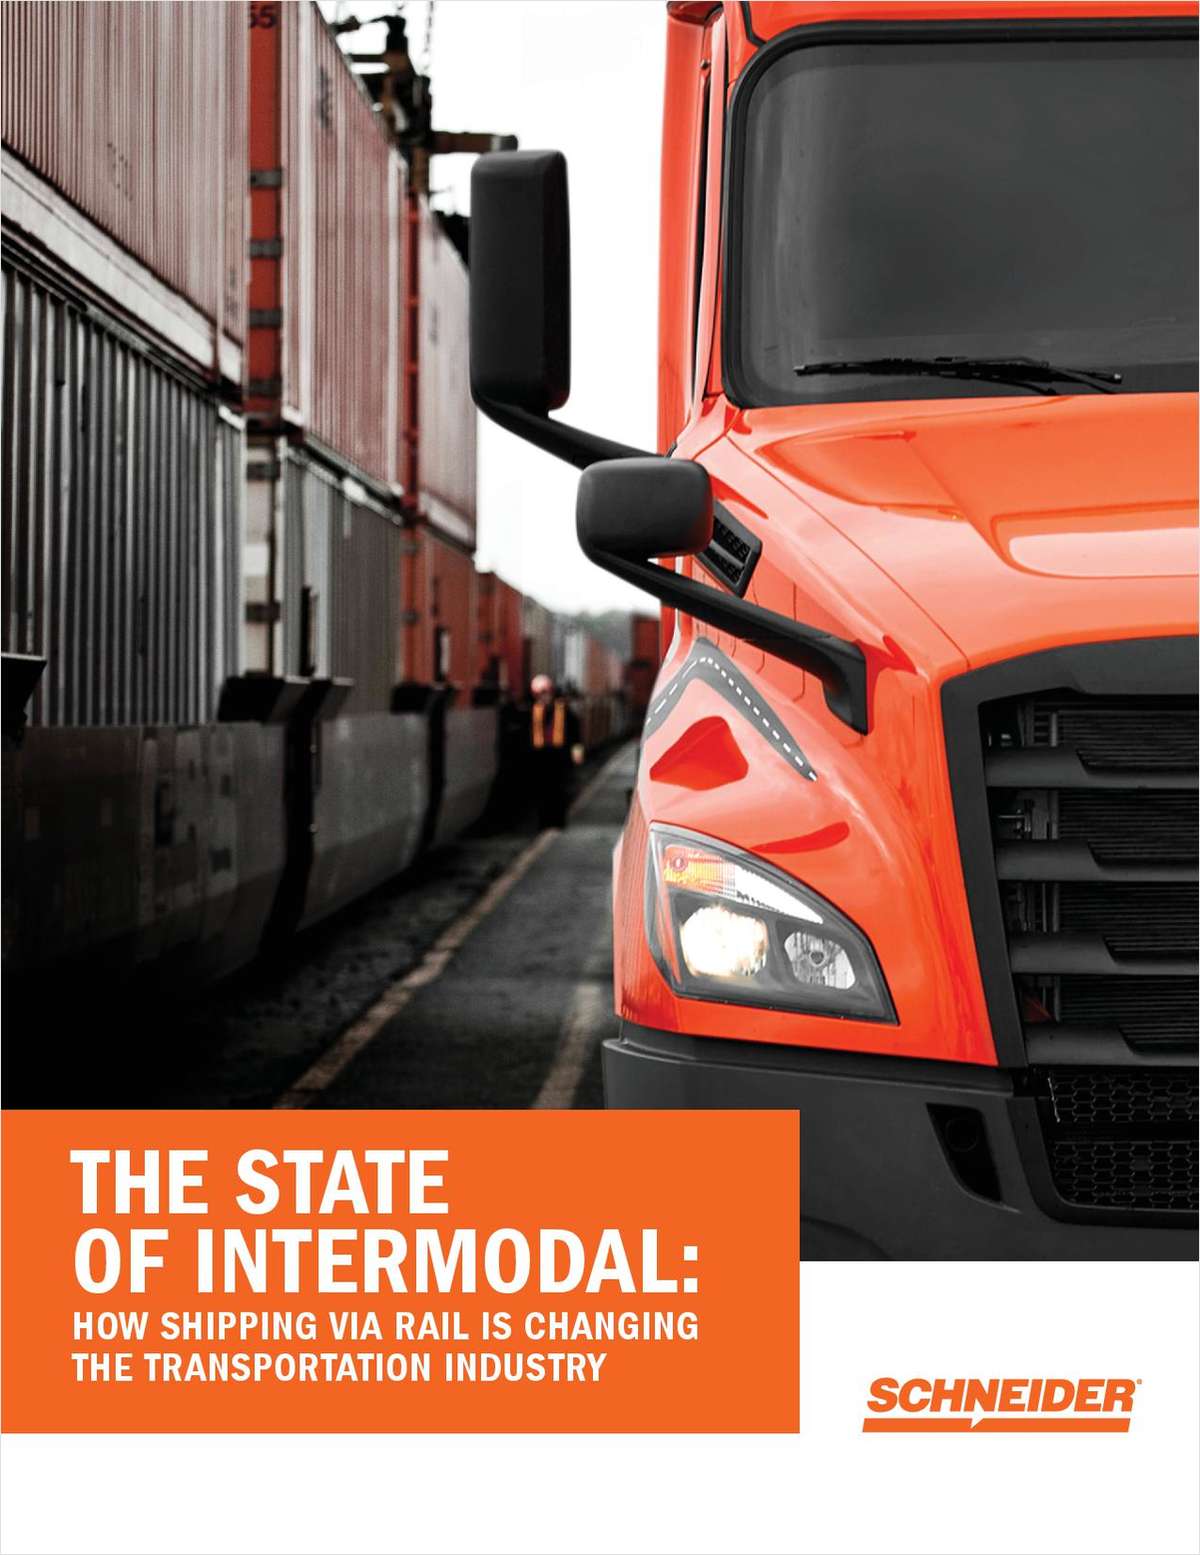 The State of Intermodal: How Shipping via Rail is Changing the Transportation Industry